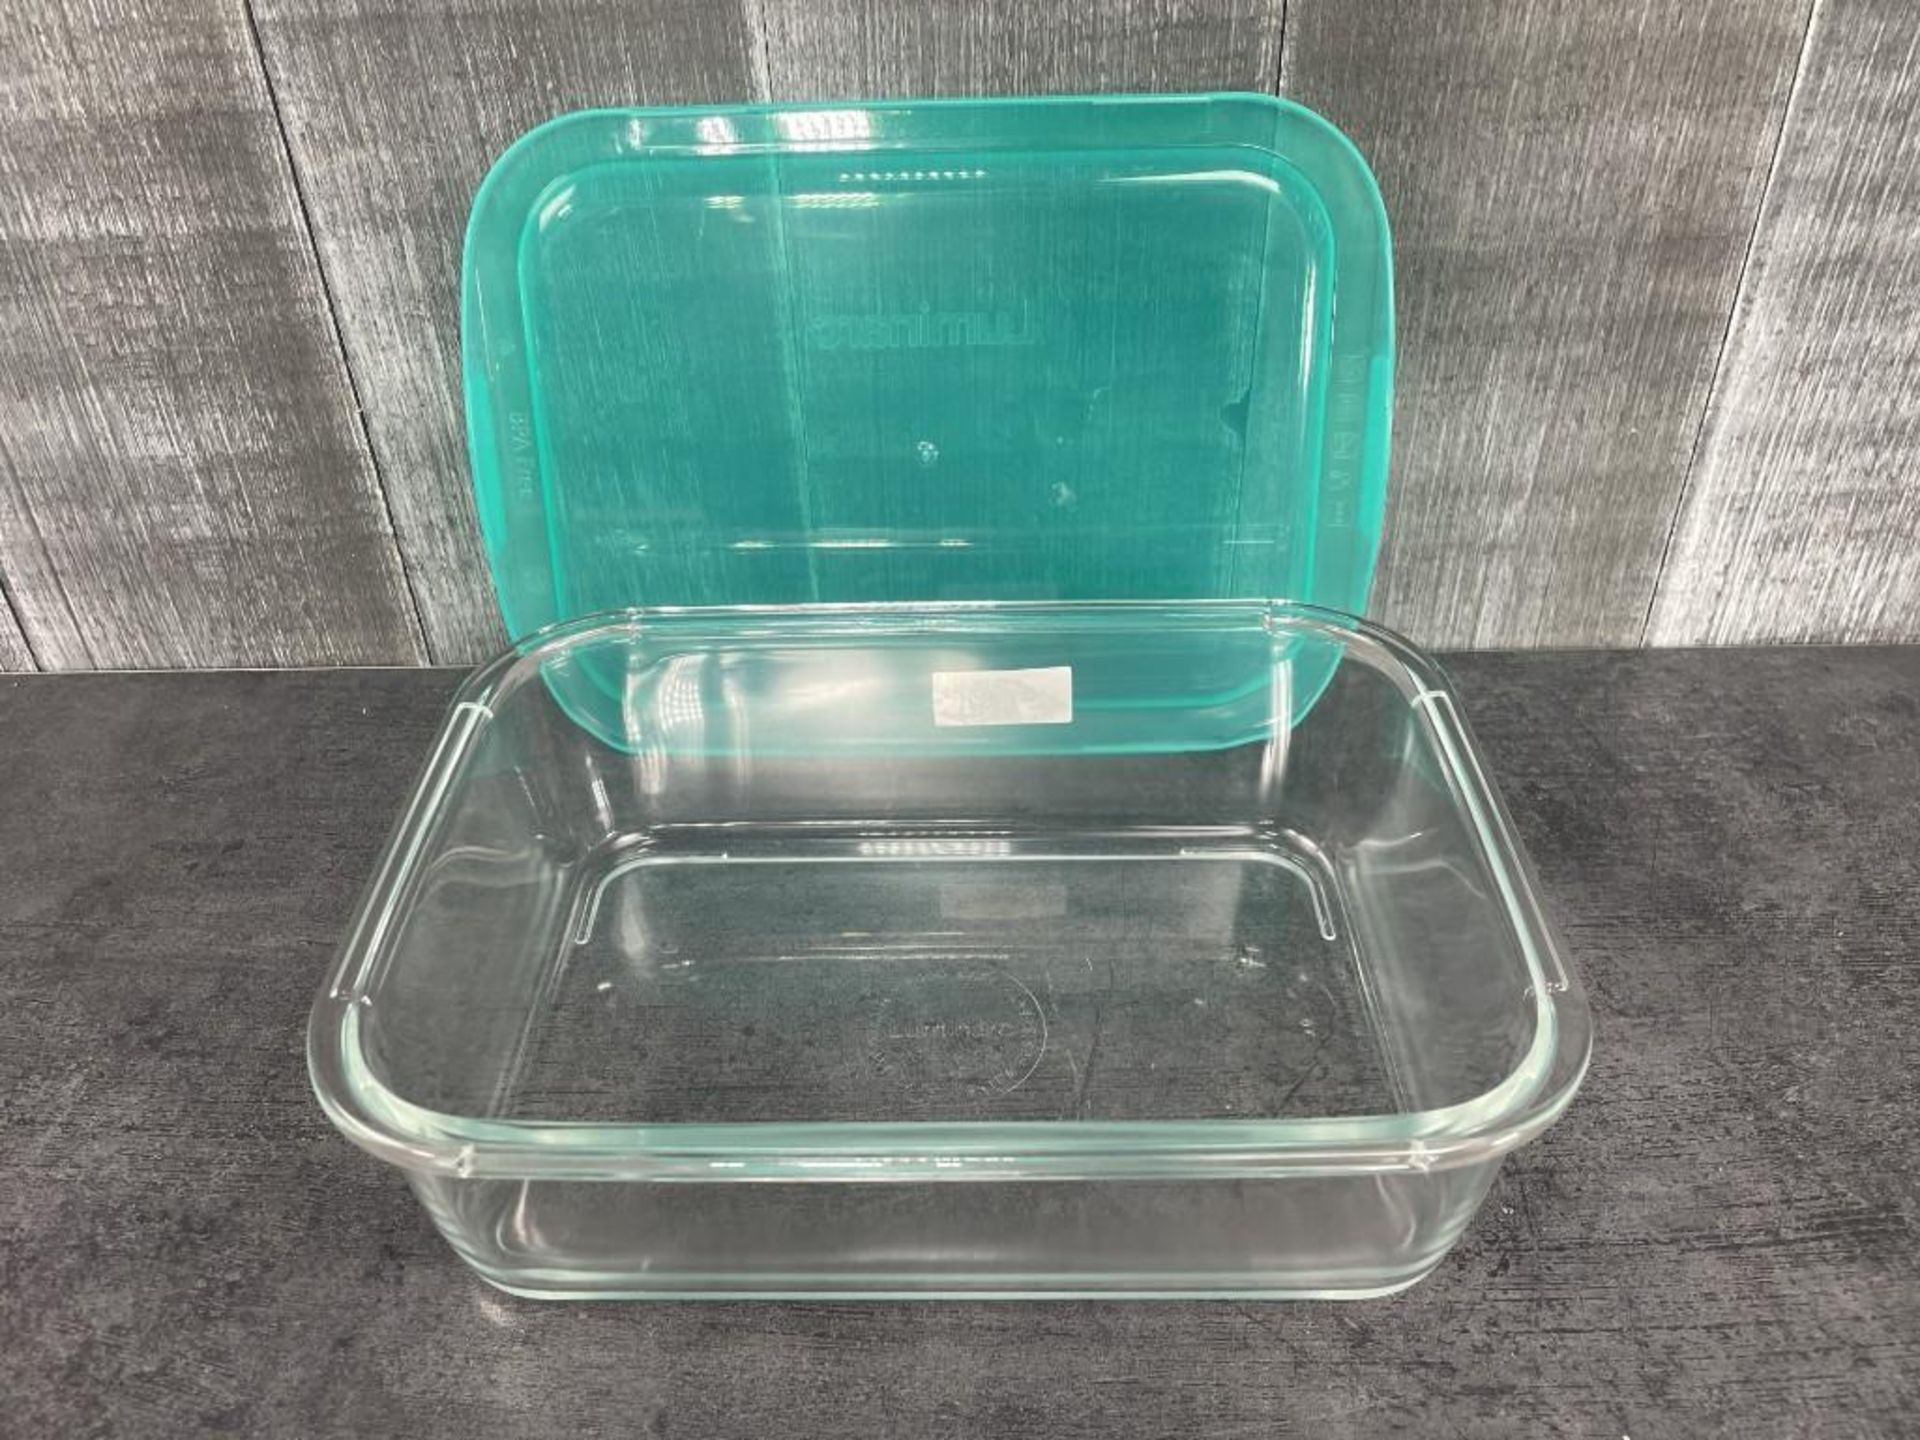 1.97L GLASS RECTANGULAR KEEP N BOXES, ARCOROC P5516 - LOT OF 12 (2 CASES) - Image 3 of 8